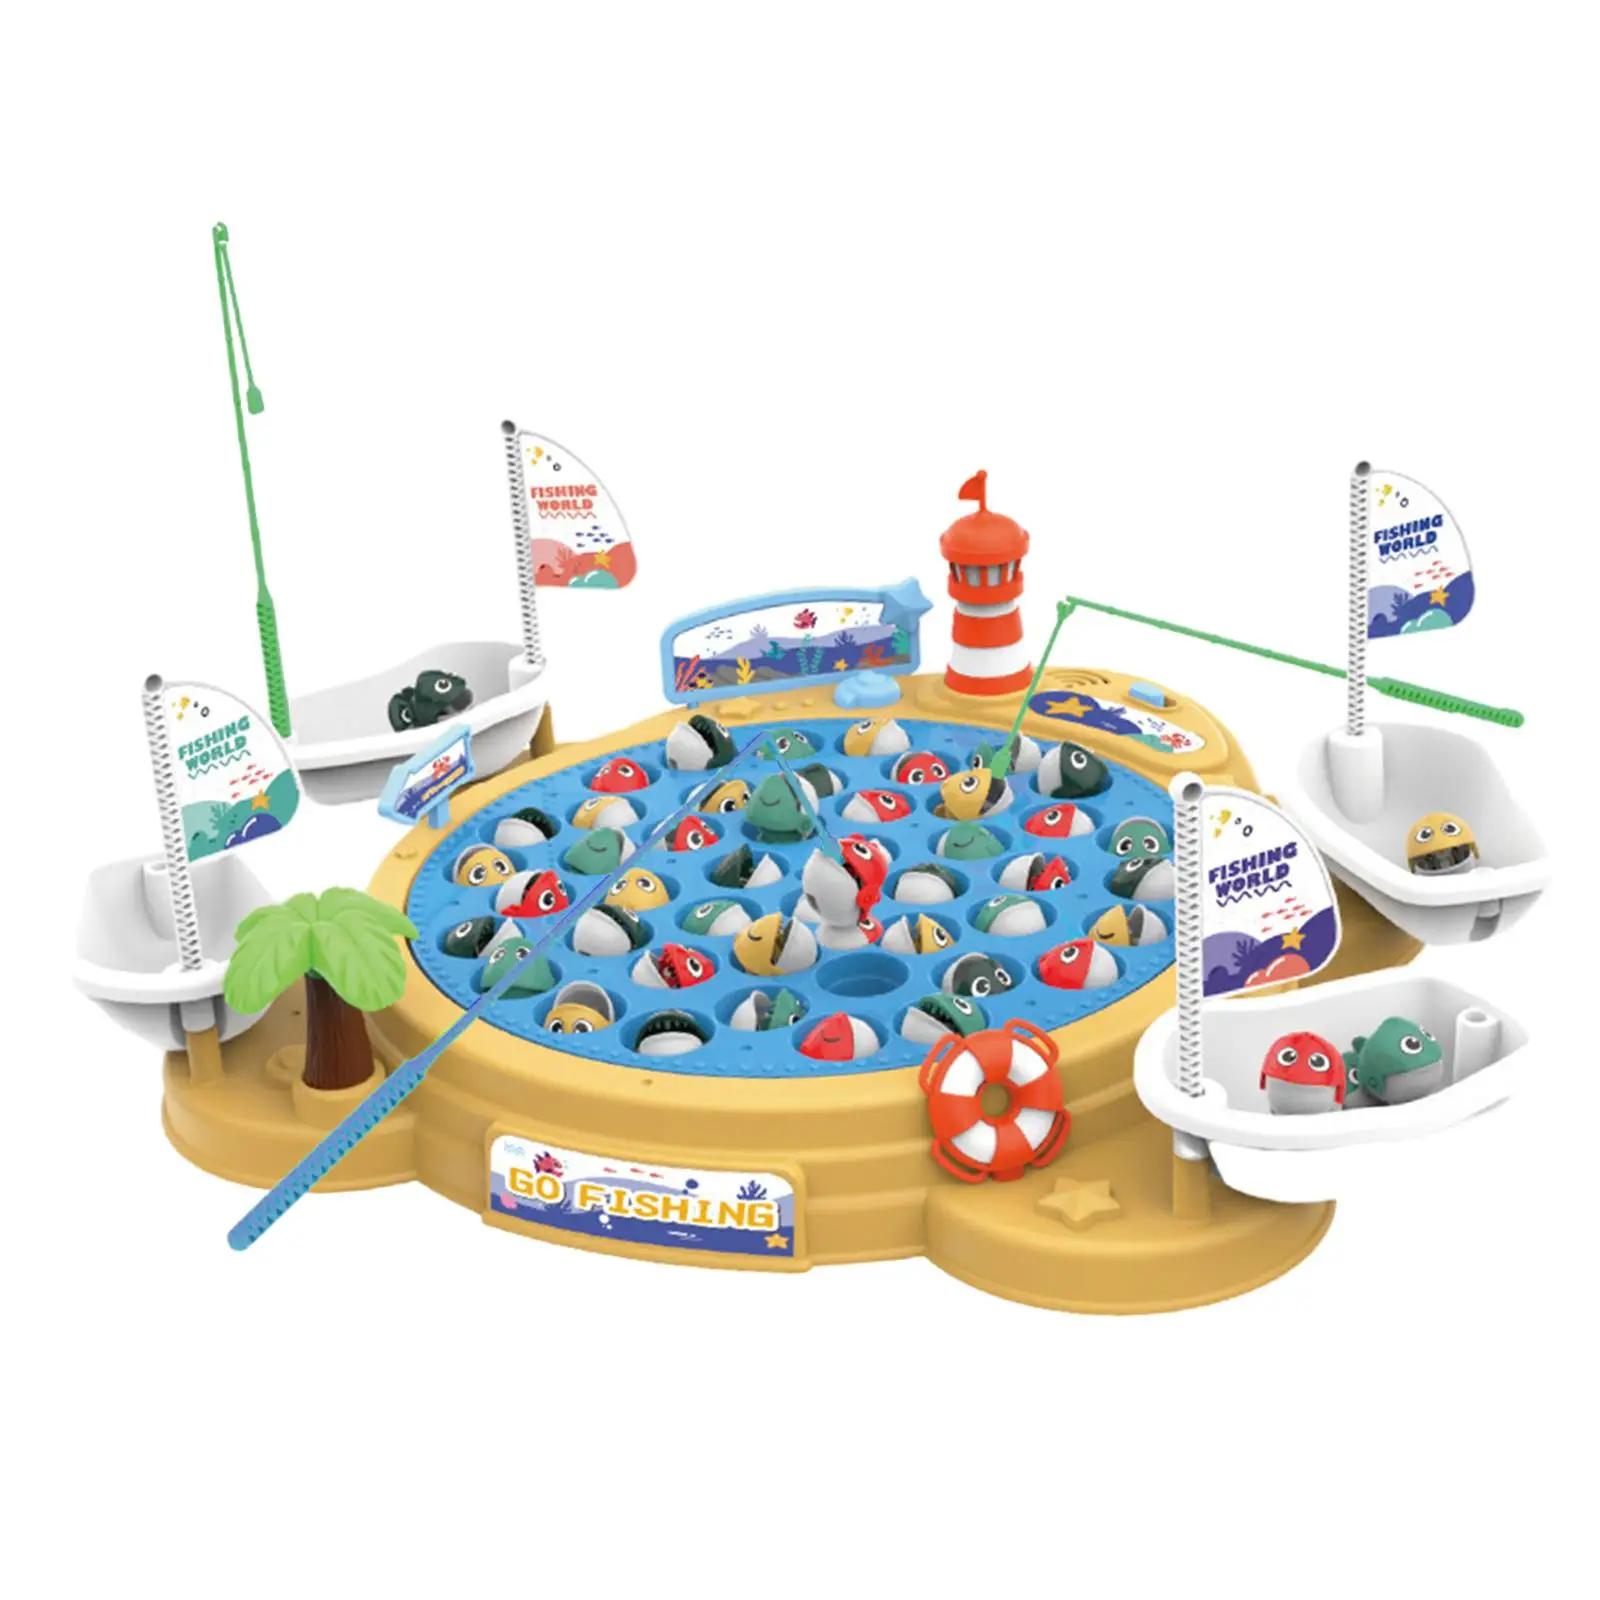 Rotating Fishing Game Toy Party Game Toy Novelty Kids Fishing Toy Electric Fishing Toy for Girls Boys Children Toddlers Kids